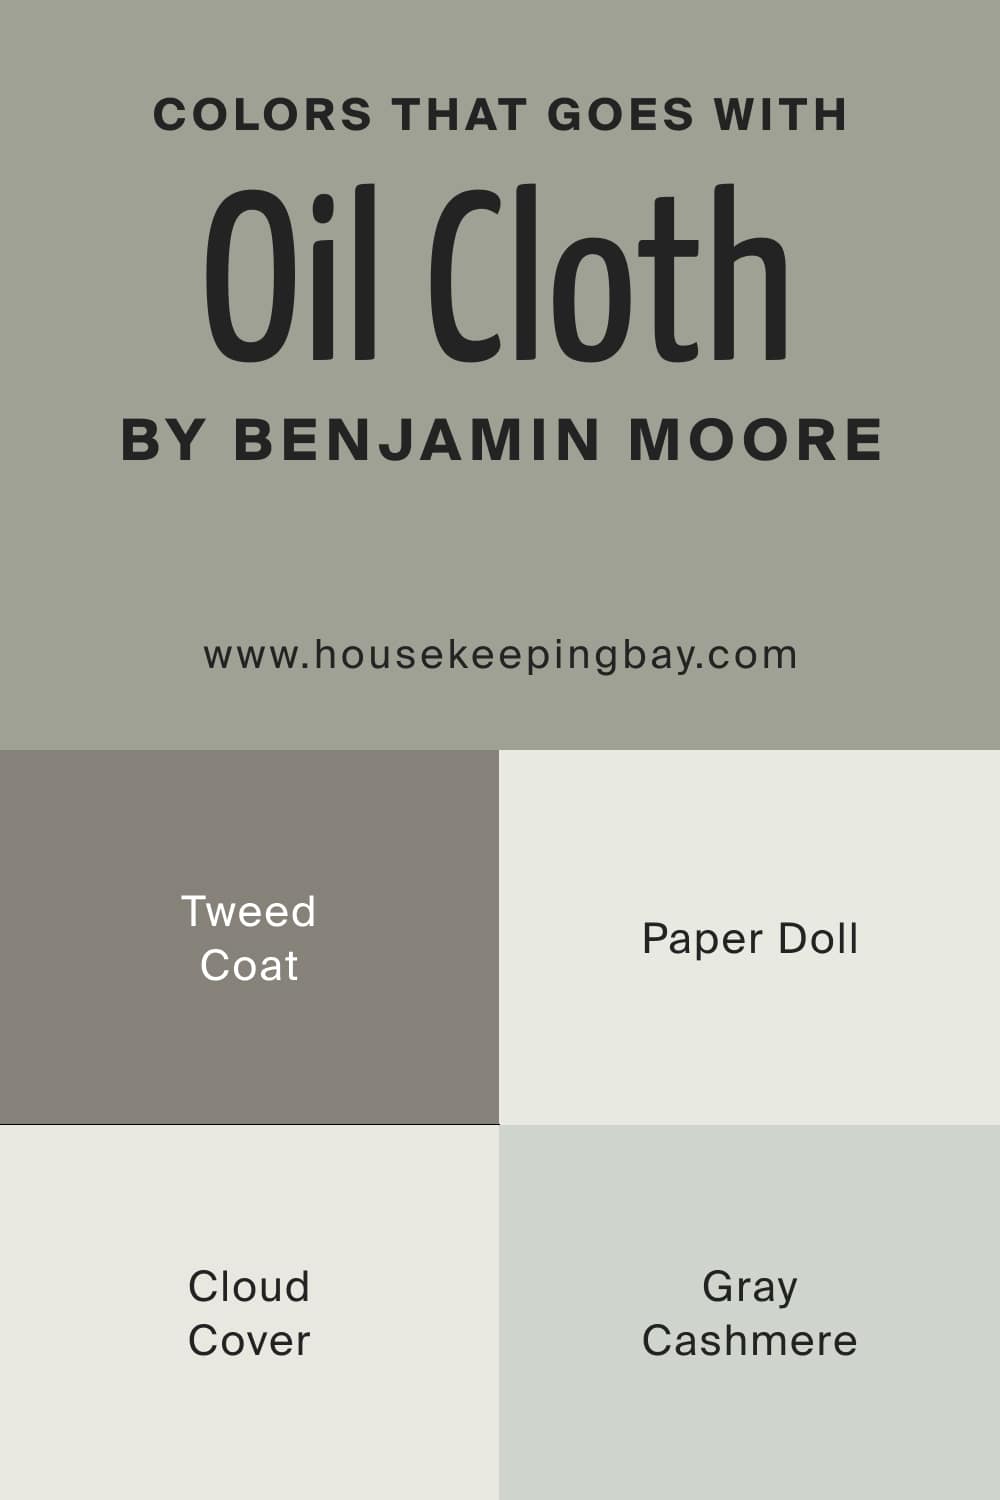 Colors that goes with Oil Cloth CSP 760 by Benjamin Moore